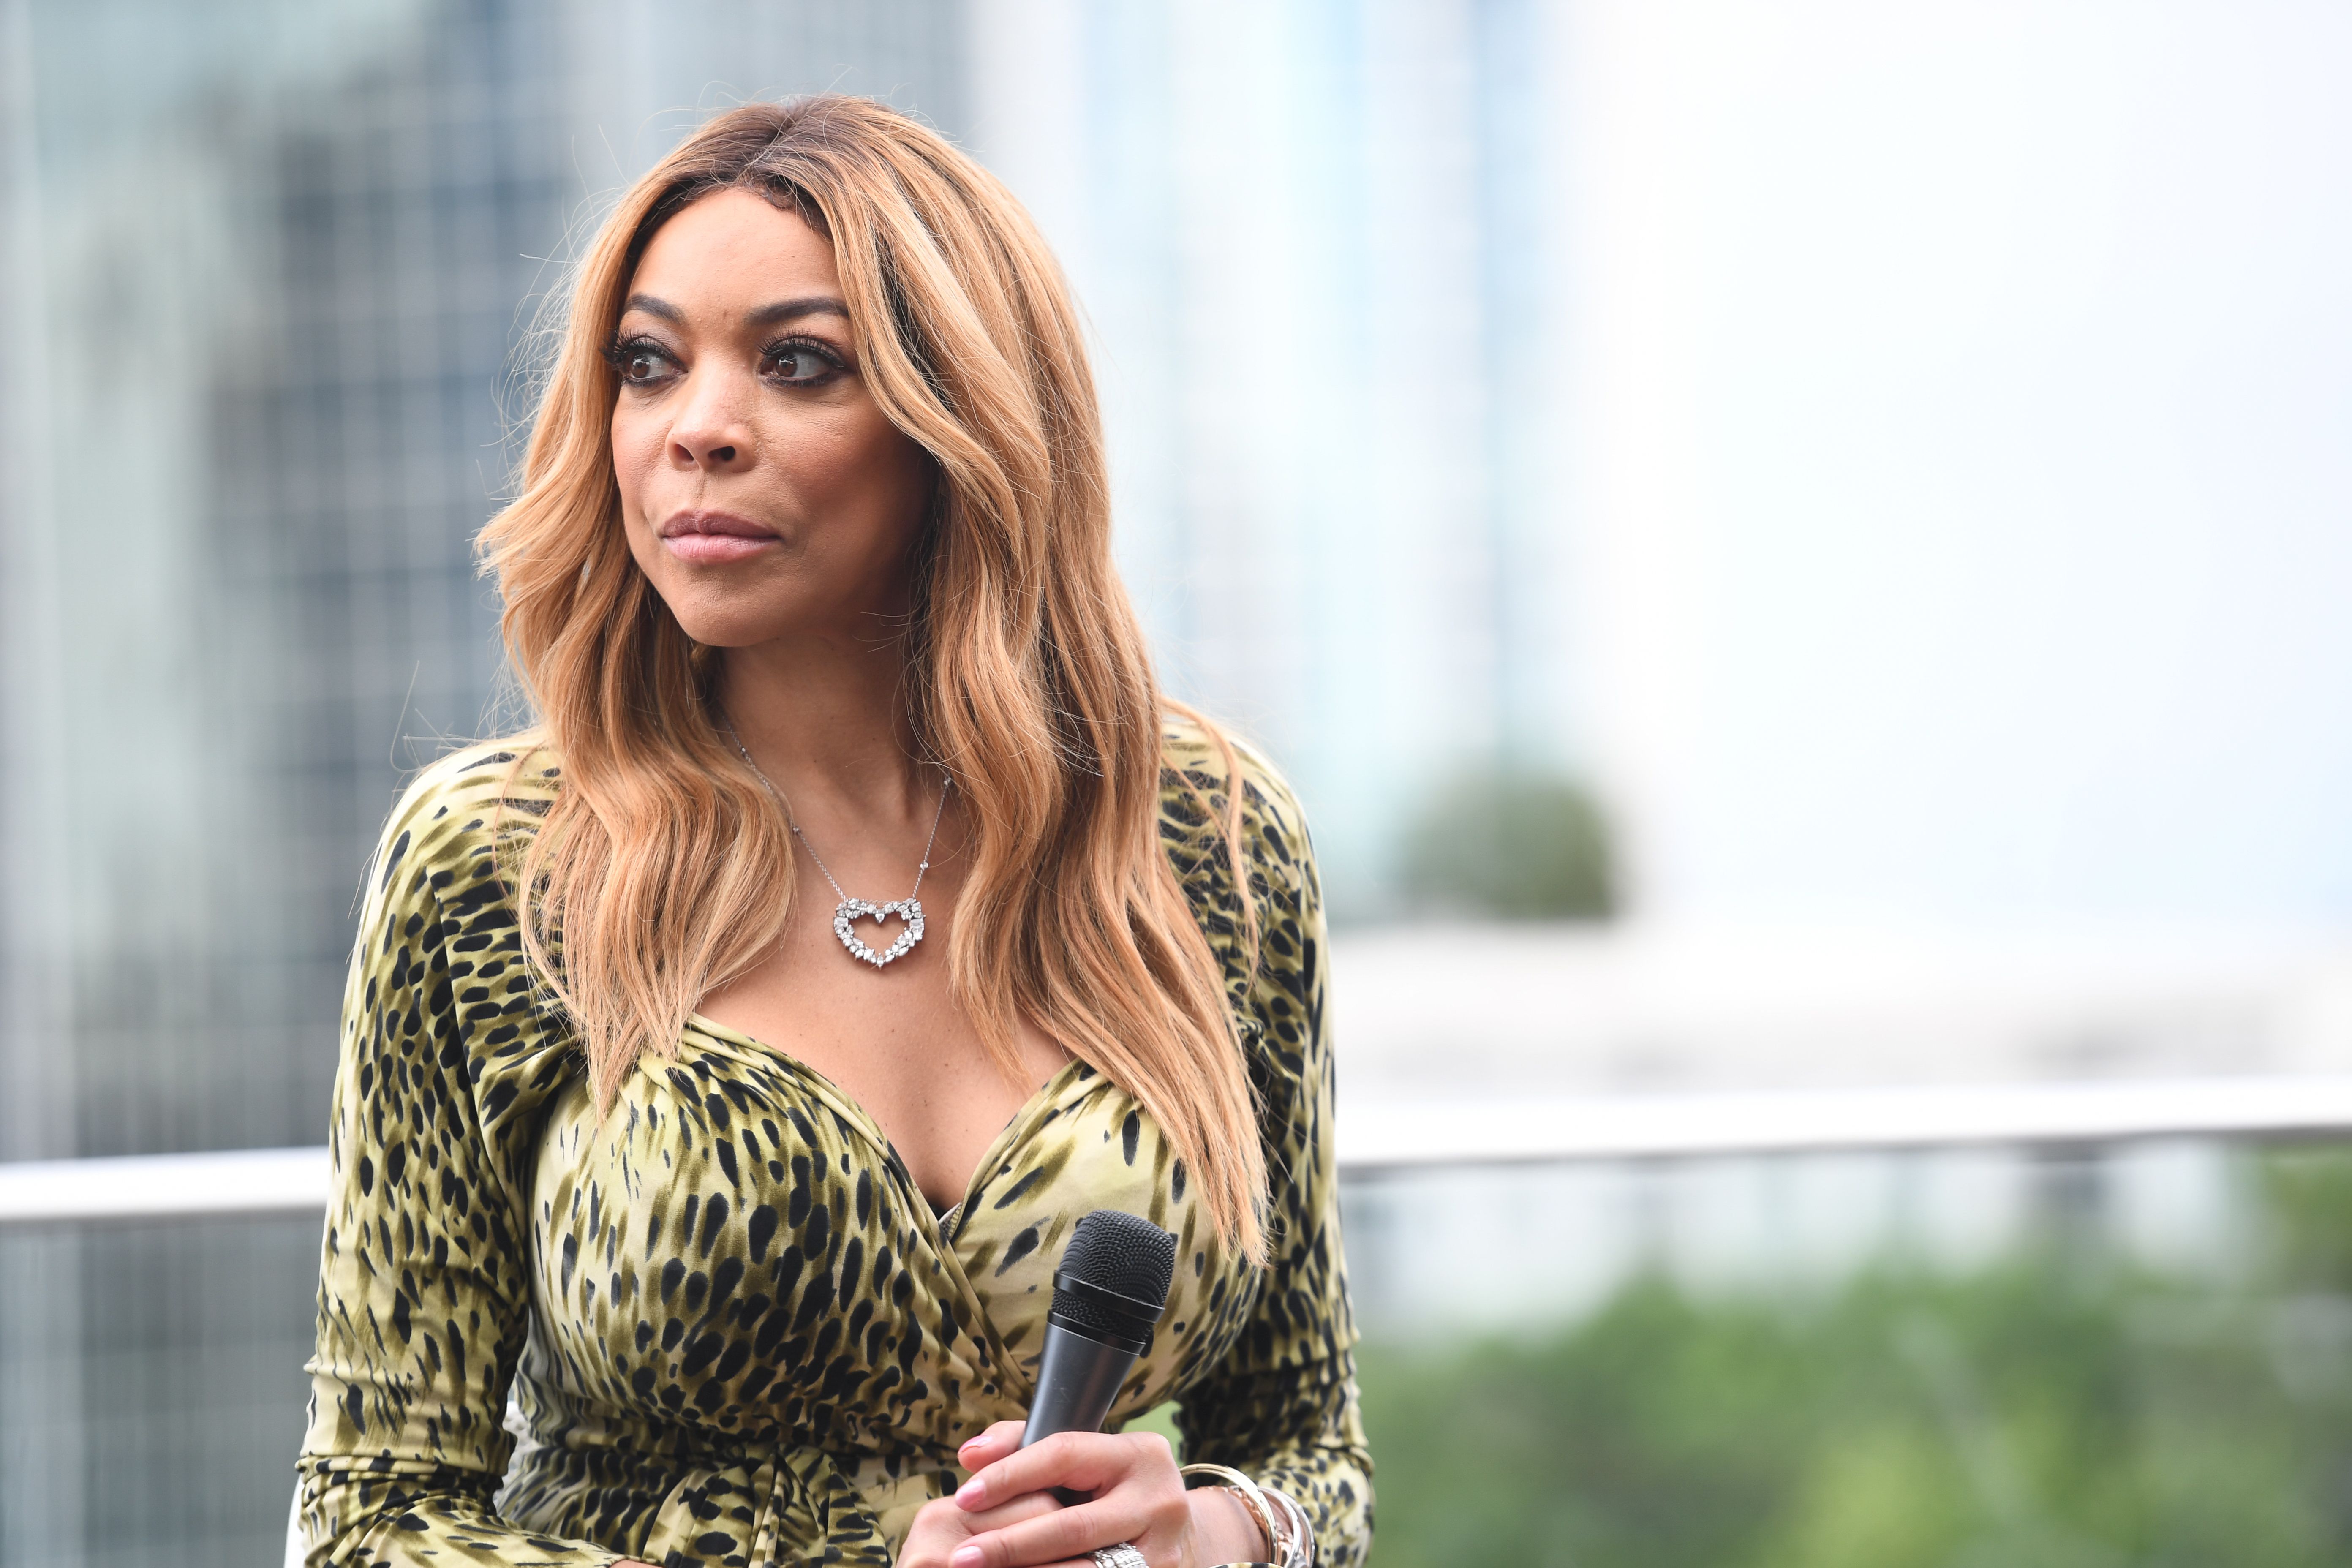  Wendy Williams attends Wendy Digital Event in 2017 in Atlanta, Georgia | Source: Getty Images